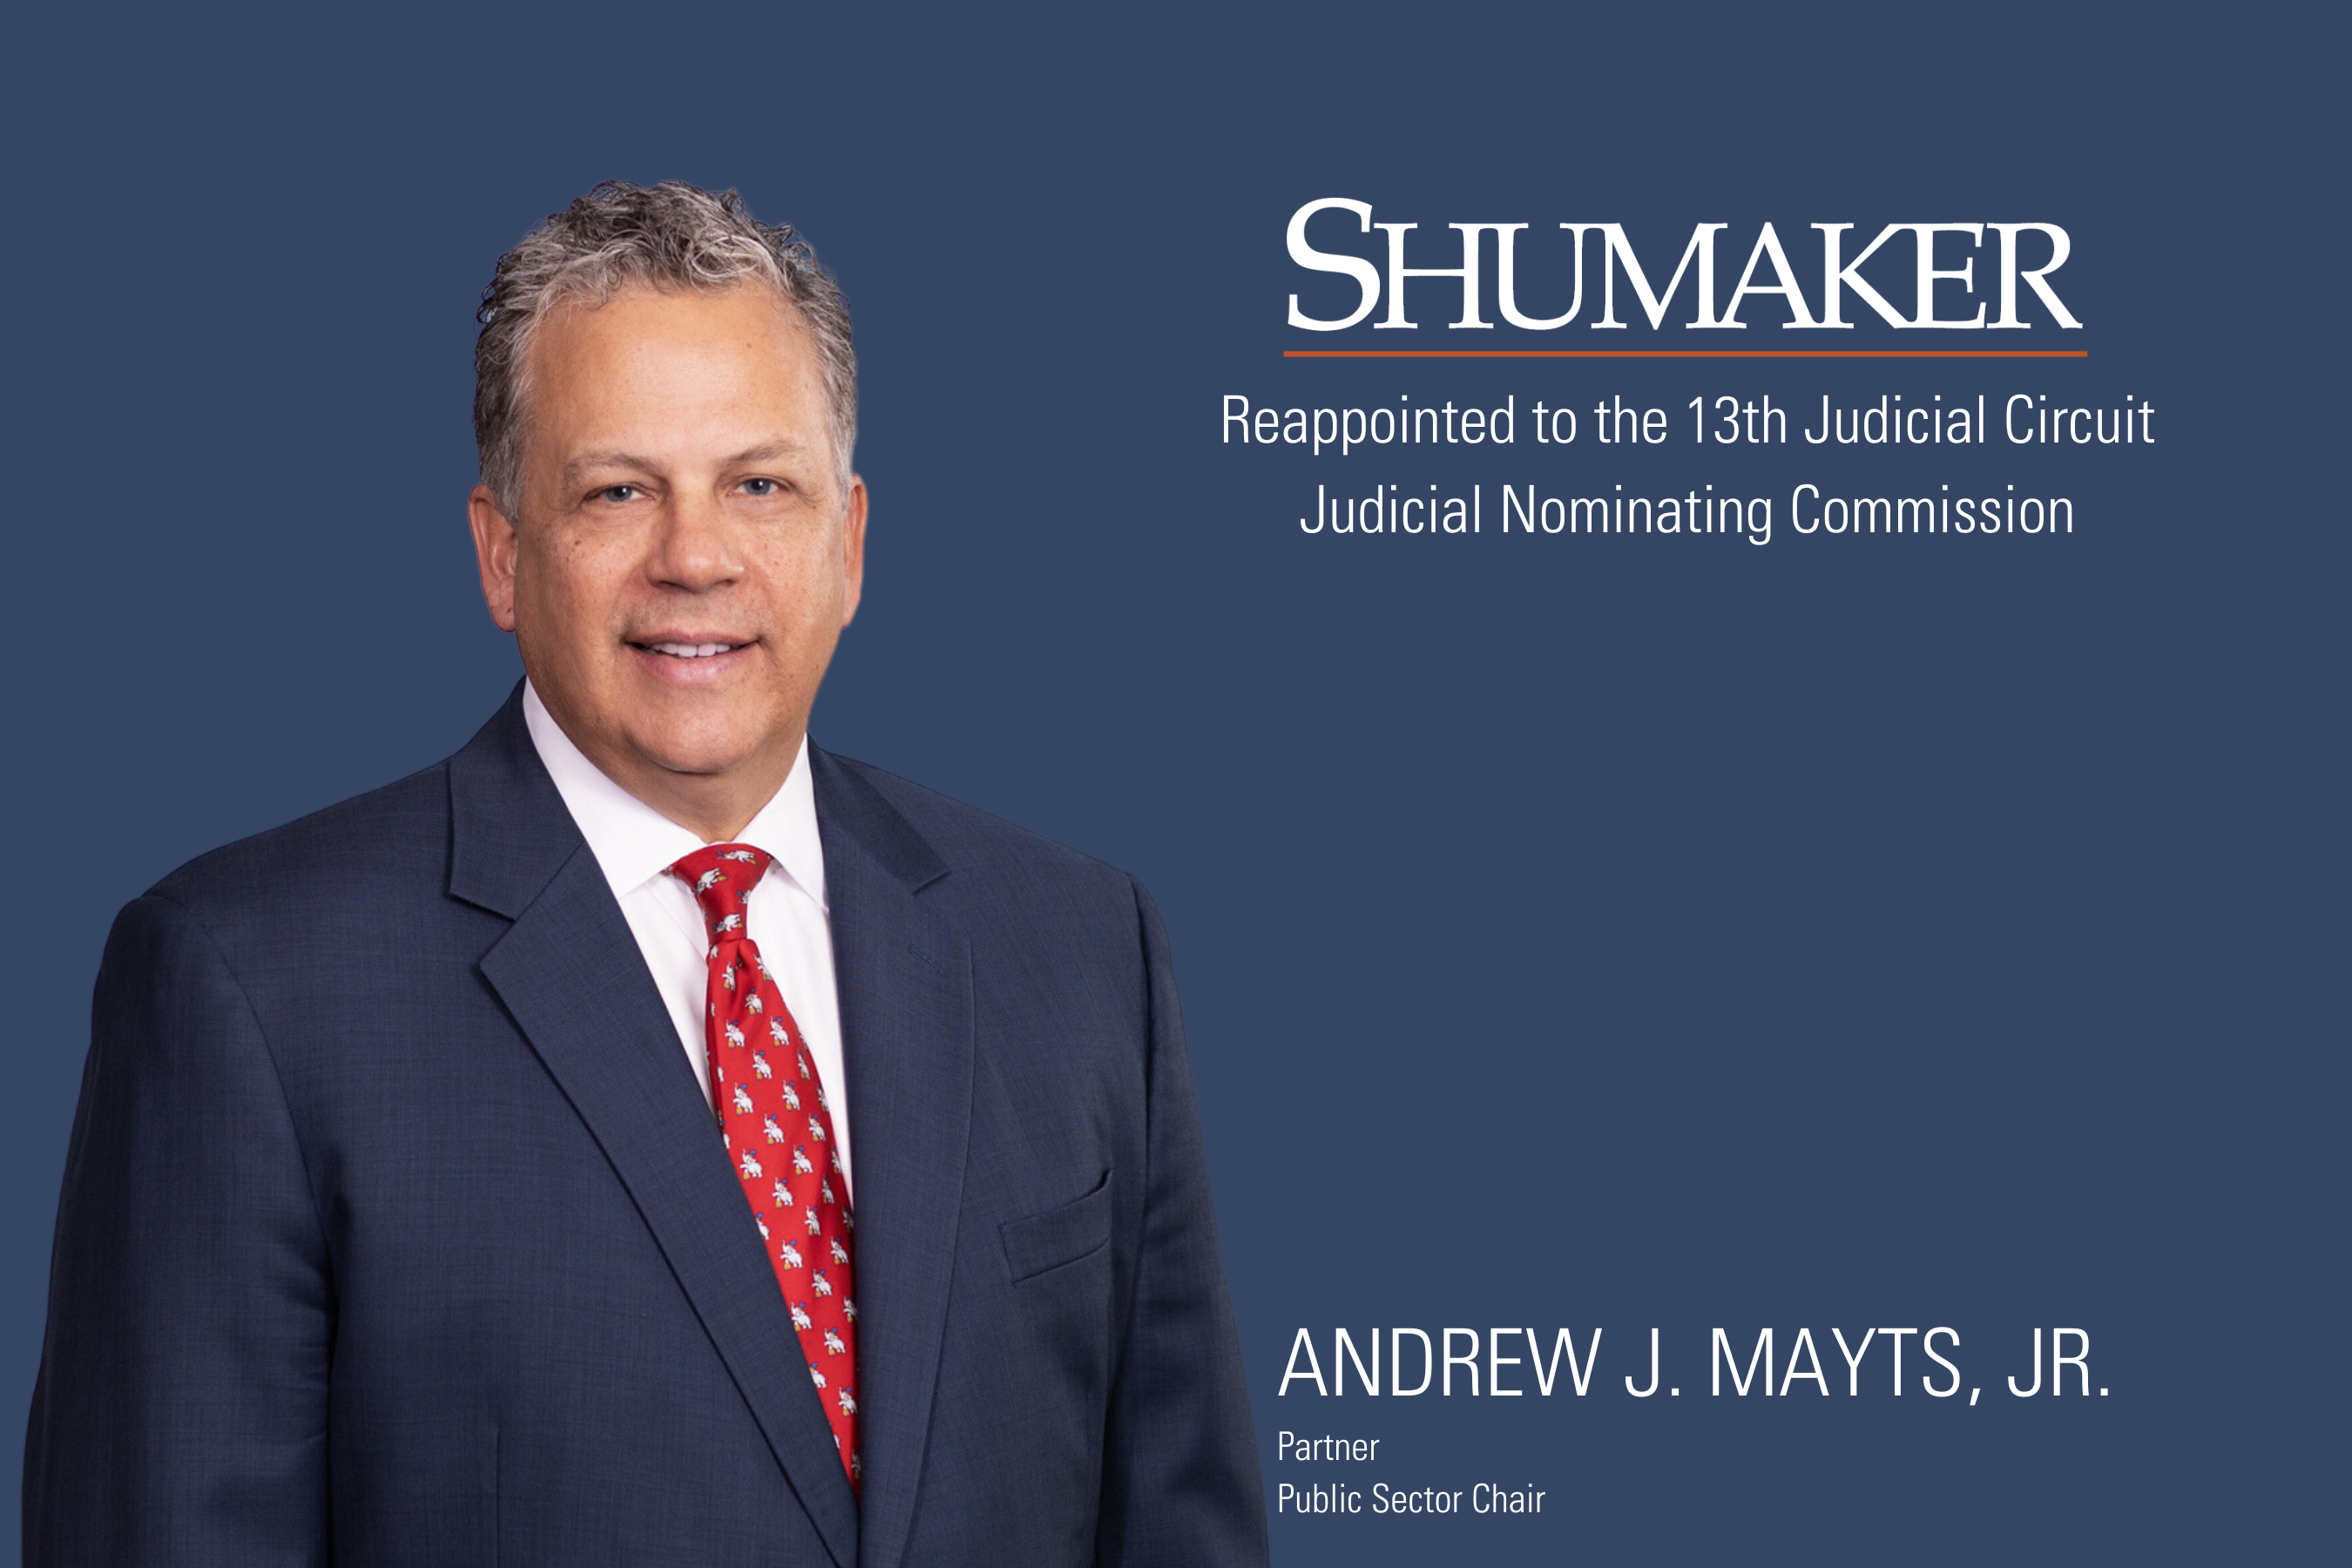 Governor Ron DeSantis Reappoints Andrew J. Mayts, Jr. to the 13th Judicial Circuit Judicial Nominating Commission